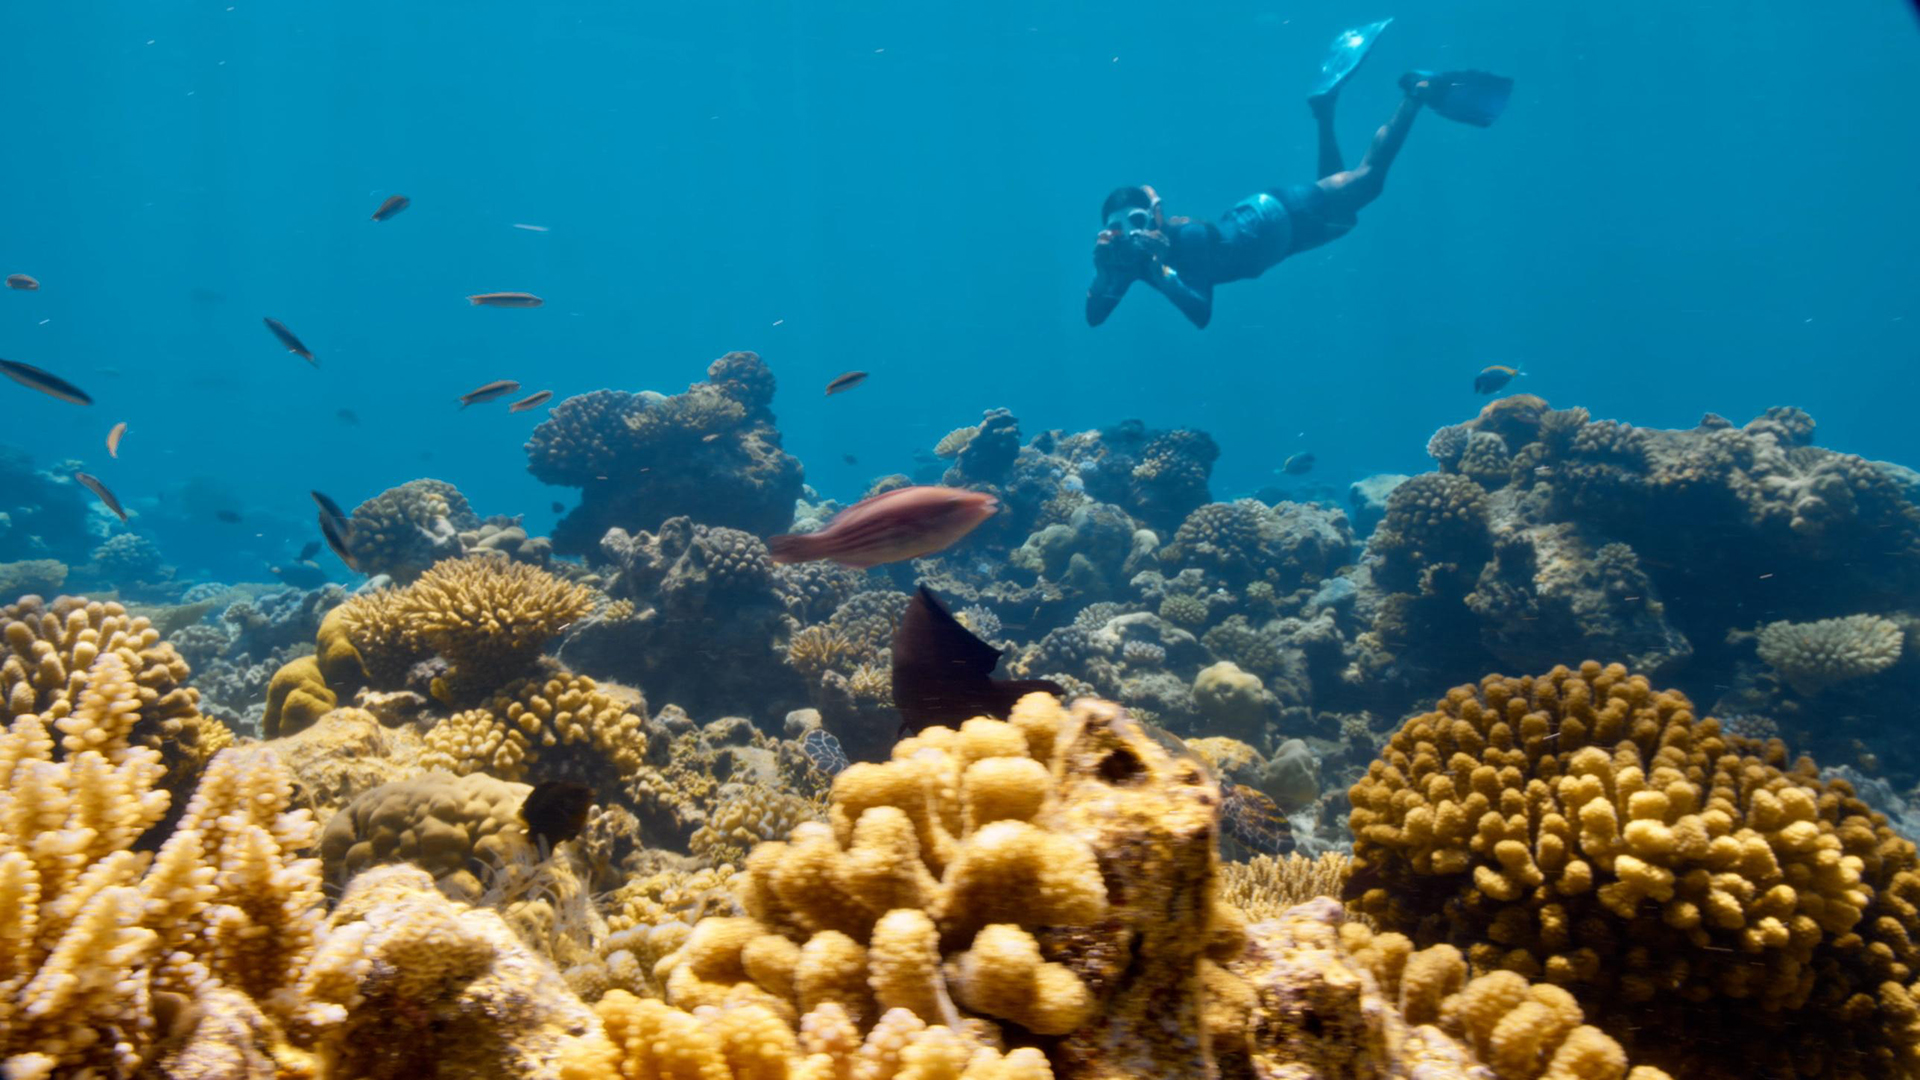 Scuba diver photographing coral reefs